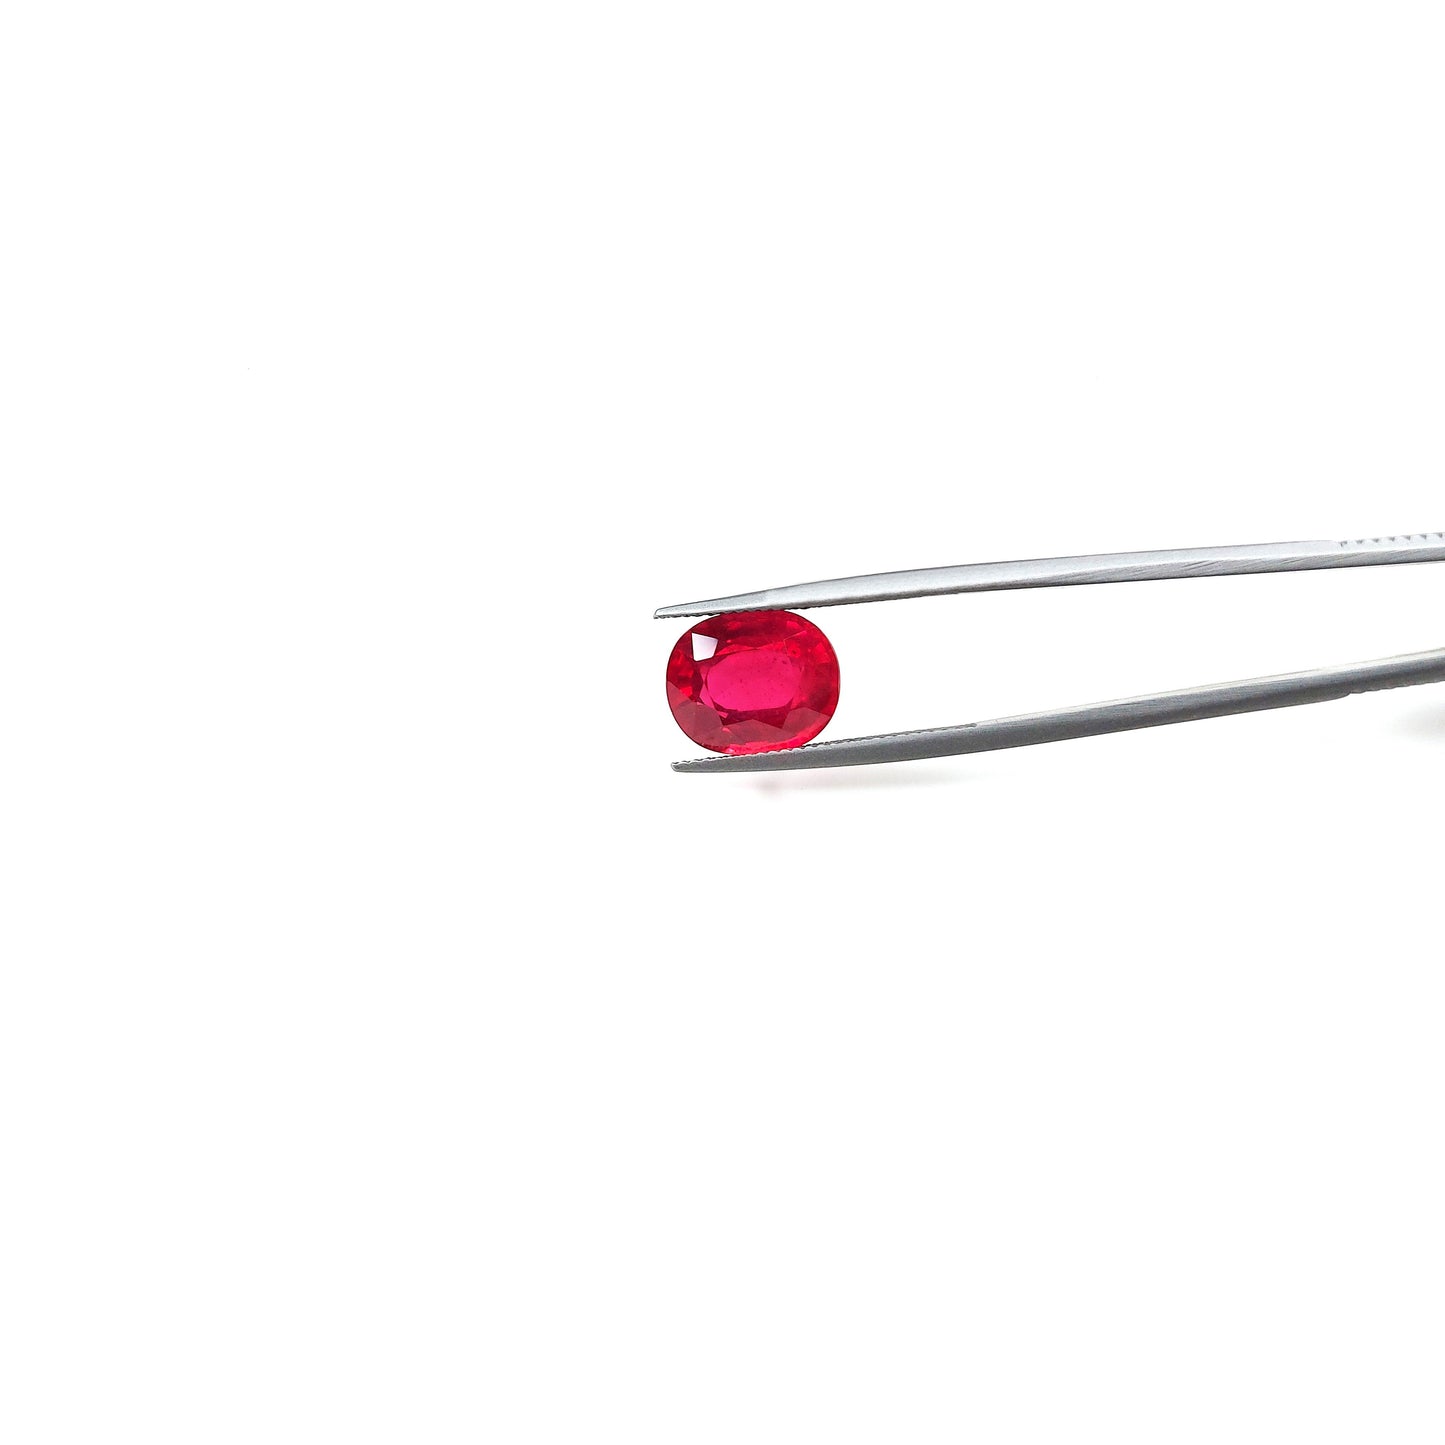 Natural Ruby Fissure Filled | 7.60cts